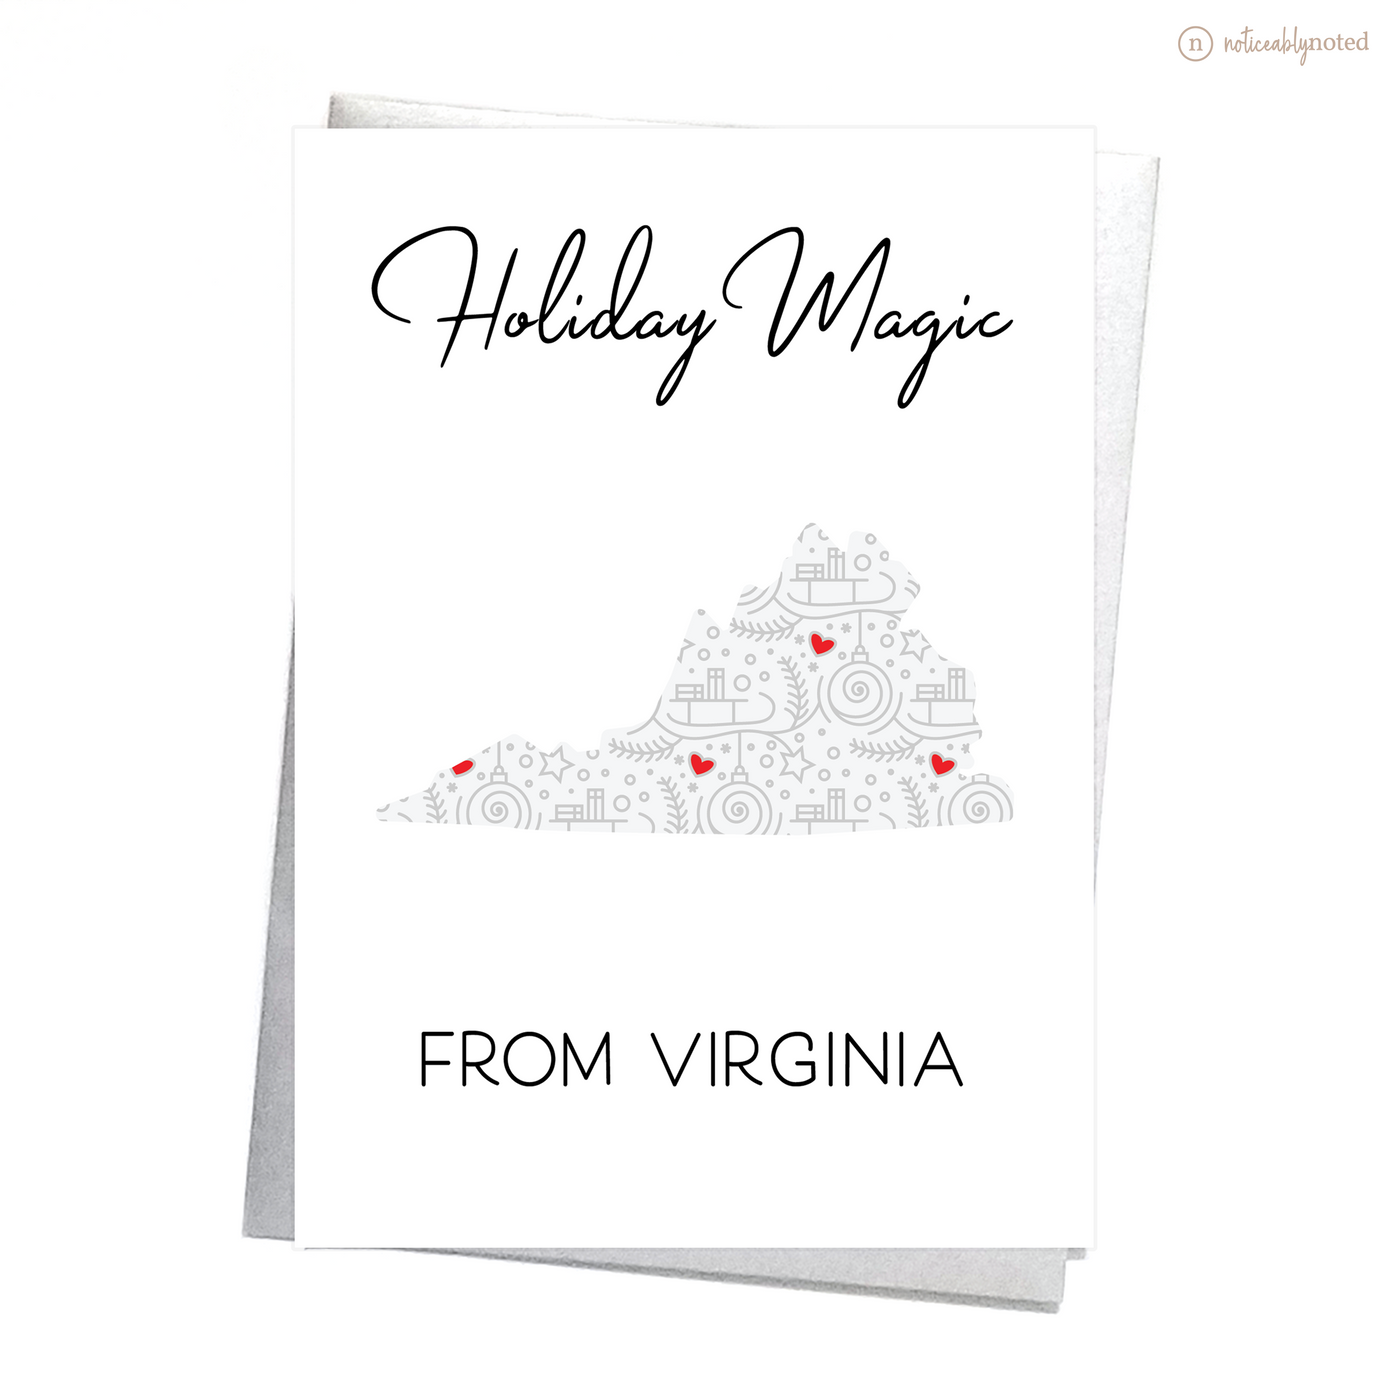 Virginia Christmas Card - Holiday Magic | Noticeably Noted